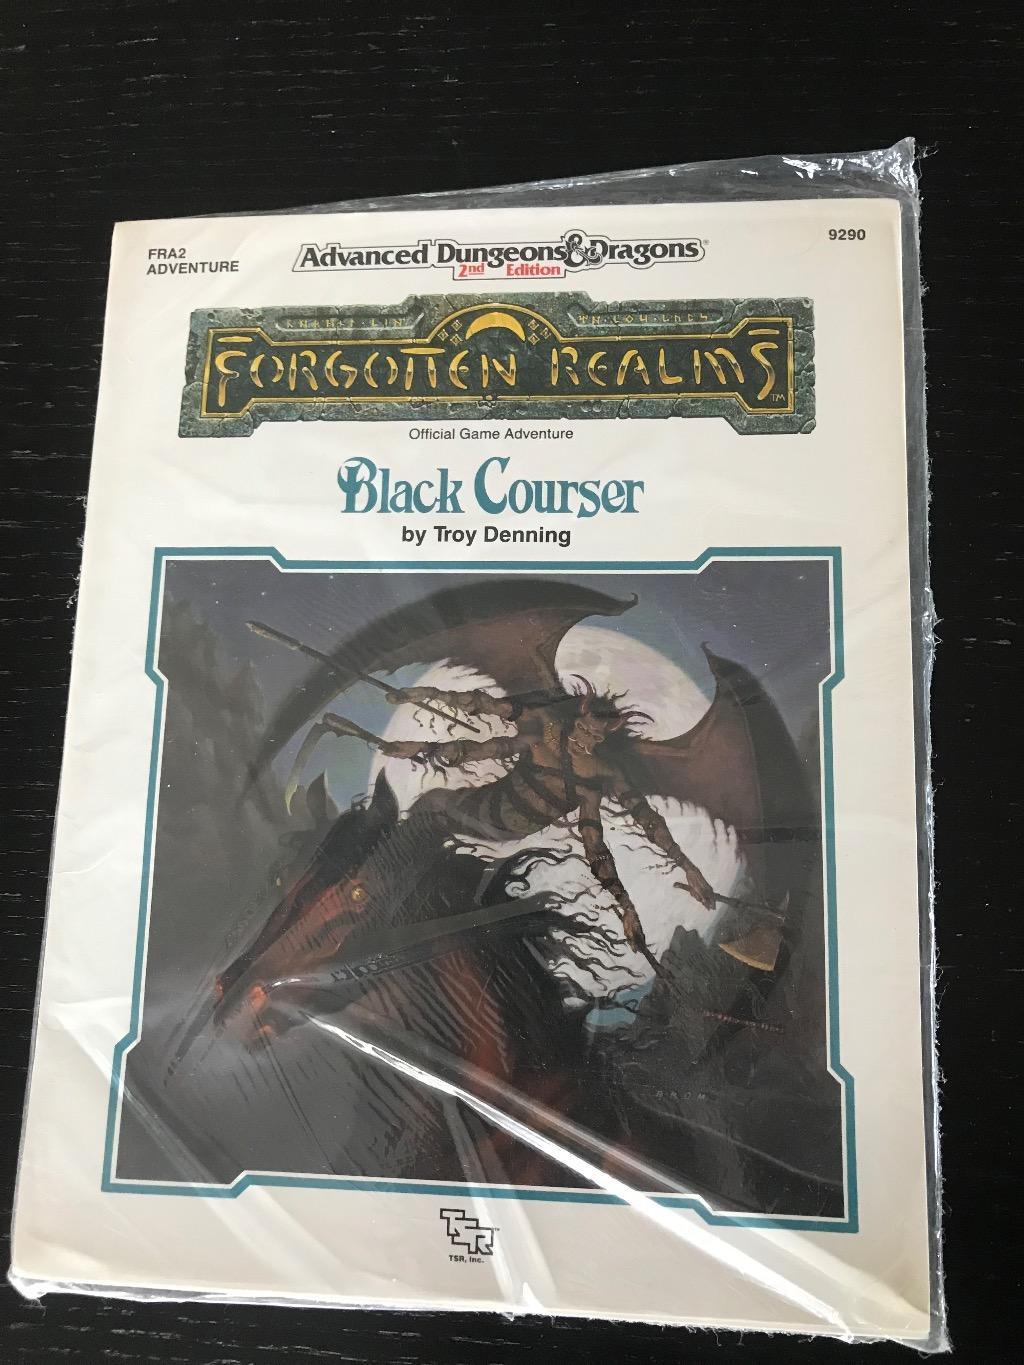 Advanced Dungeons & Dragons - 2nd Edition - Fra2 - Forgotten Realms - Black Courser